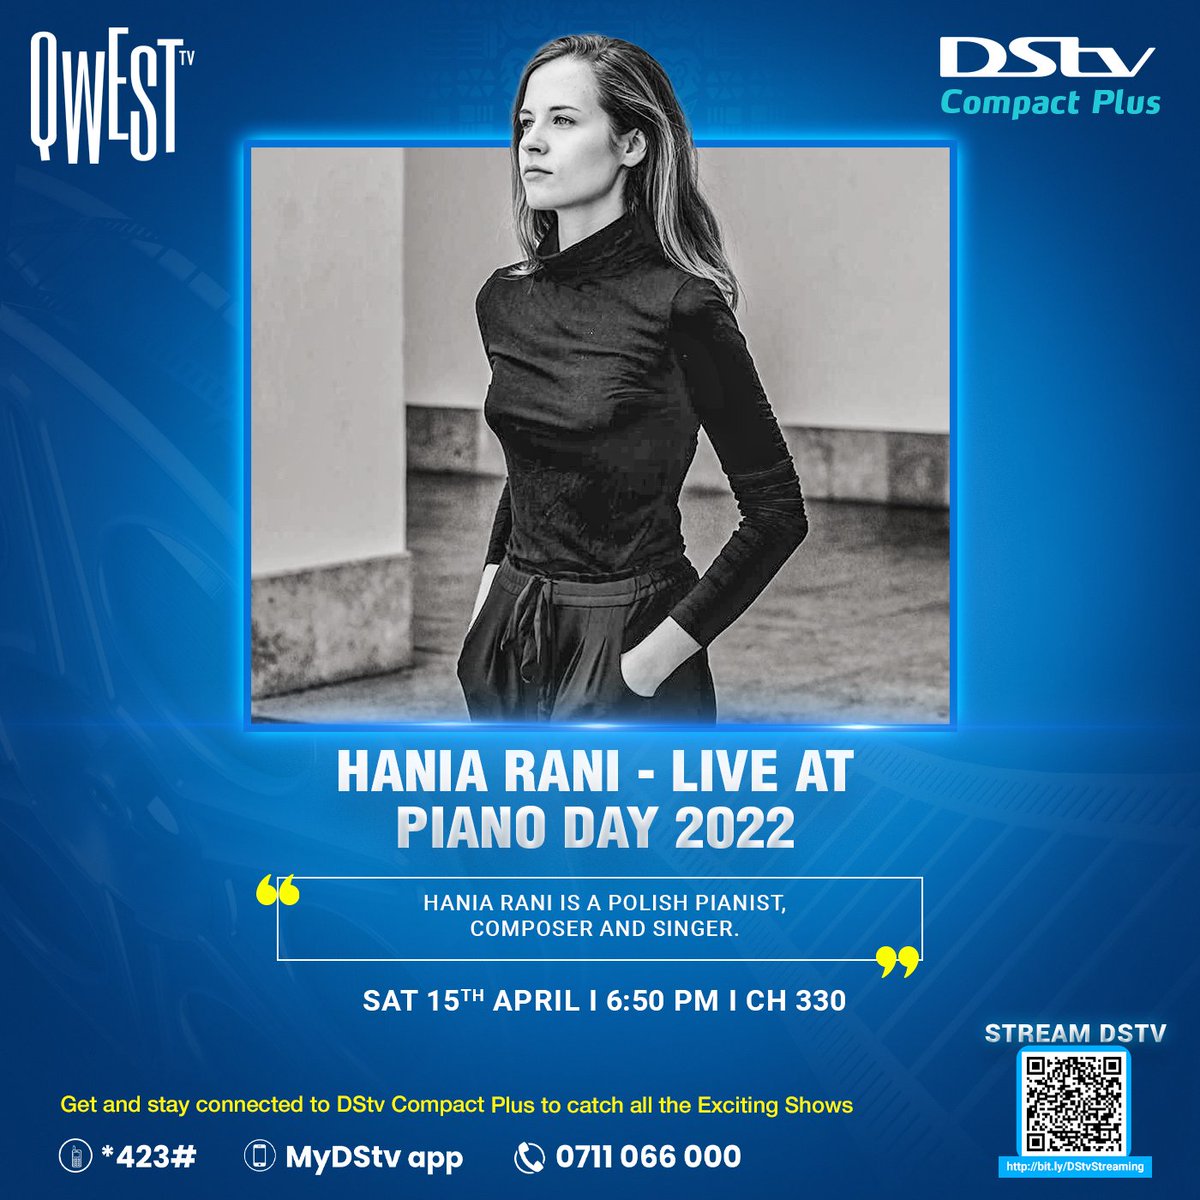 Polish pianist Hania Rani, rising star of the modern classical scene, shows off her unique sound at Piano Day.

Hania Rani - Live at Piano Day | 6:50 pm | Qwest TV Ch. 330

Download #MyDStv App or Dial ✳423# to buy, pay, reconnect, or clear errors.
#DoSometv #WhereMusicLives